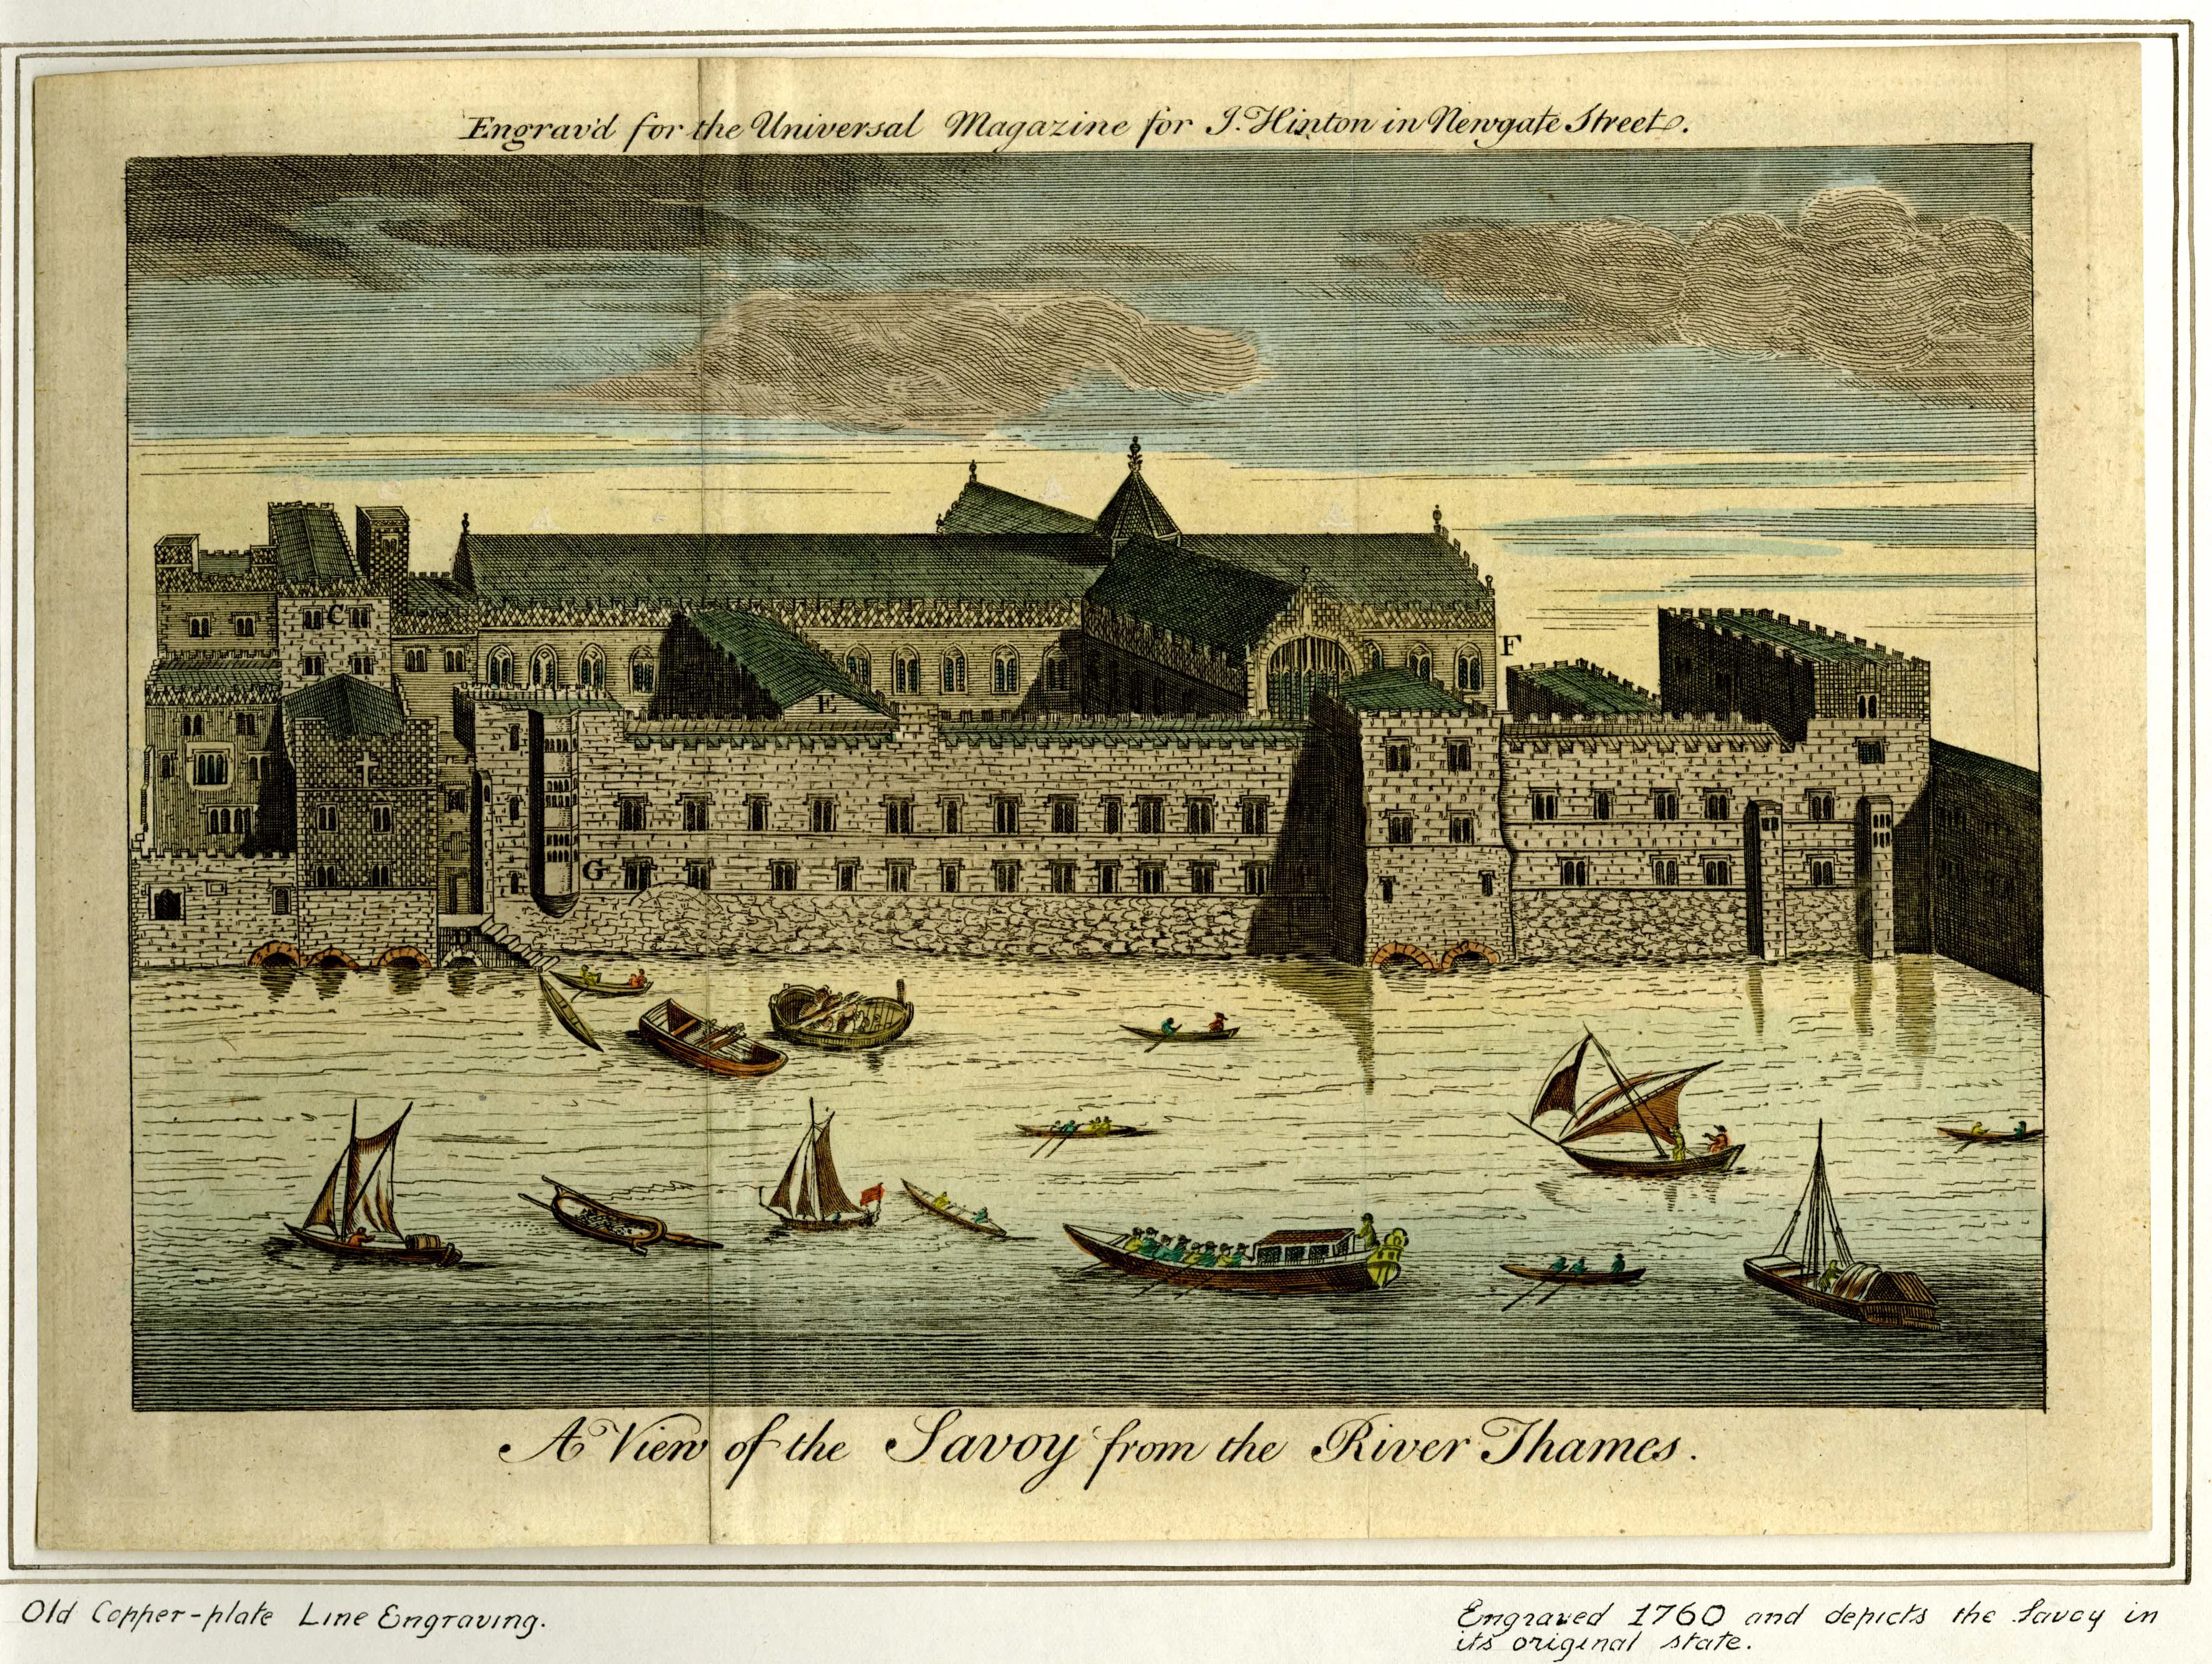 A view of The Savoy from the River Thames 1760